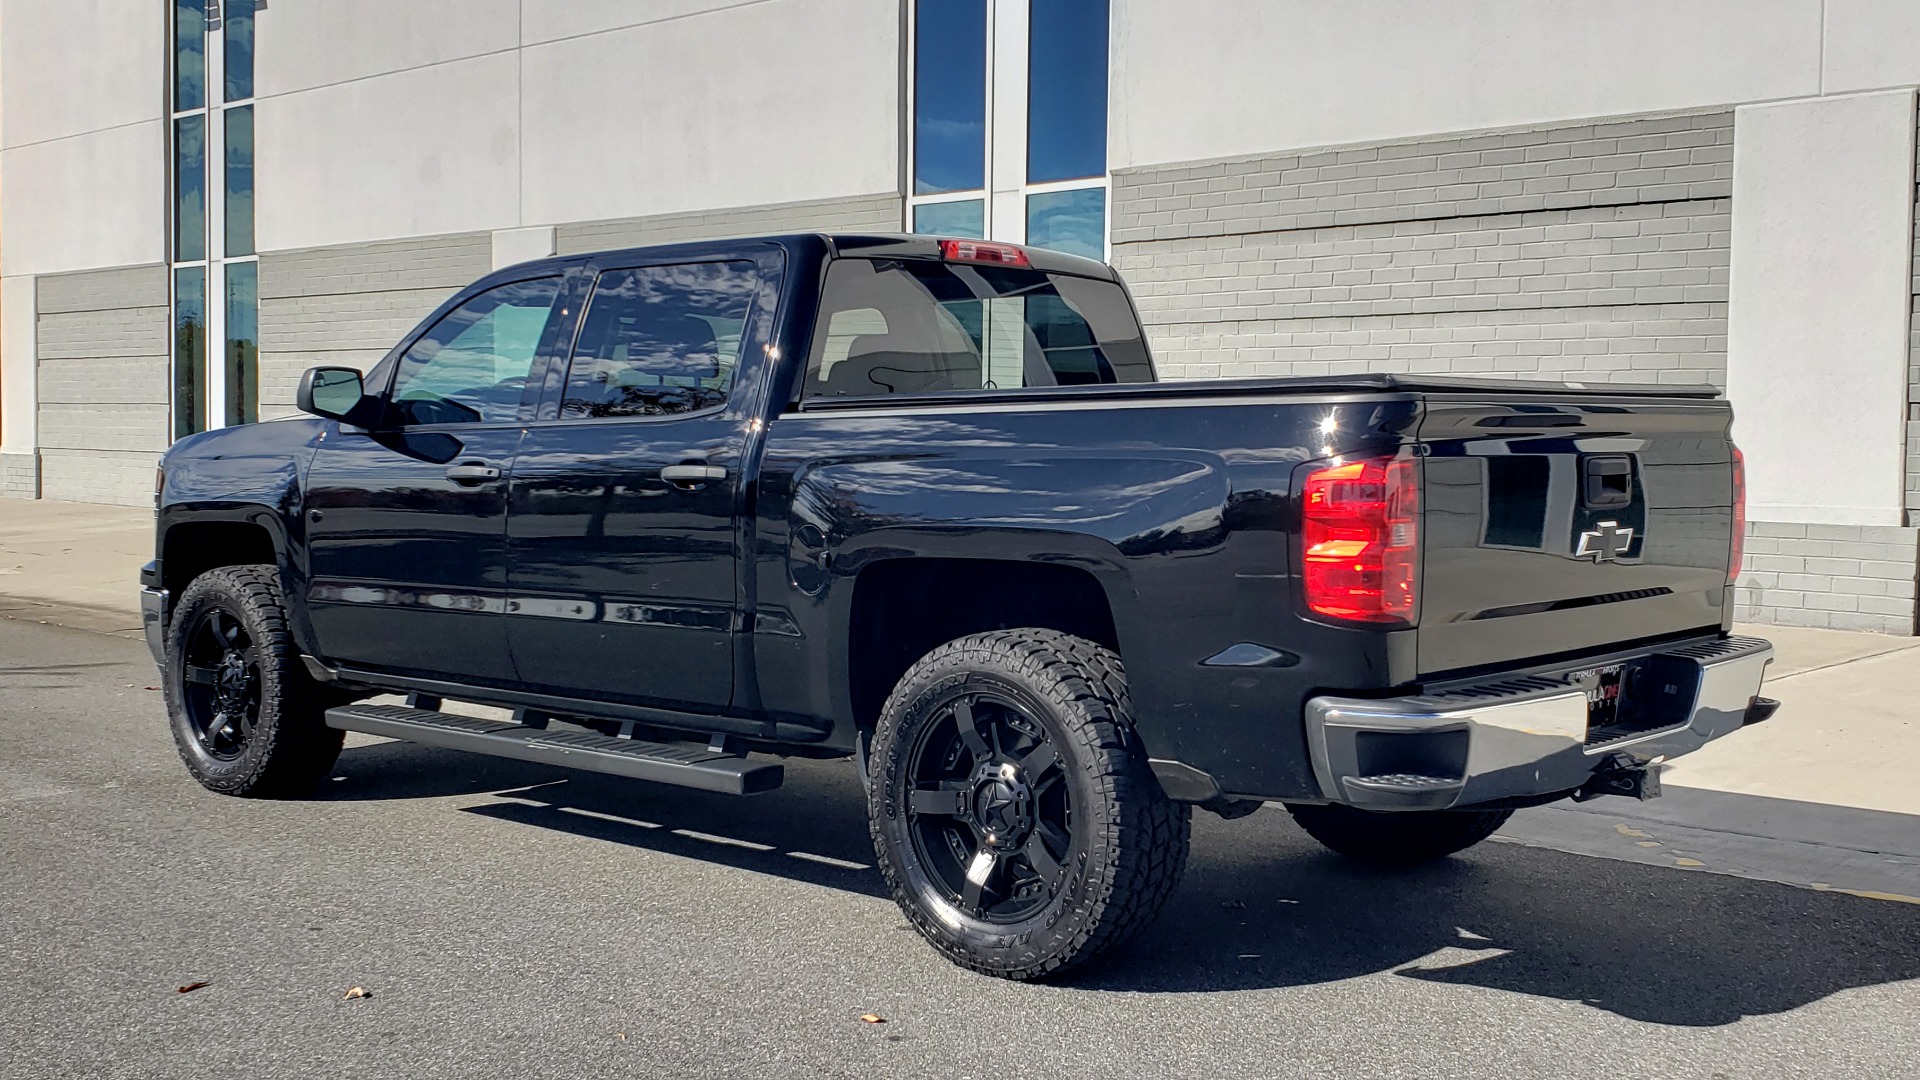 Used 2014 Chevrolet SILVERADO 1500 LT CREWCAB Z71 2LT / 5.3L V8 / AUTO / CONV PKG / TOW / REARVIEW for sale Sold at Formula Imports in Charlotte NC 28227 5